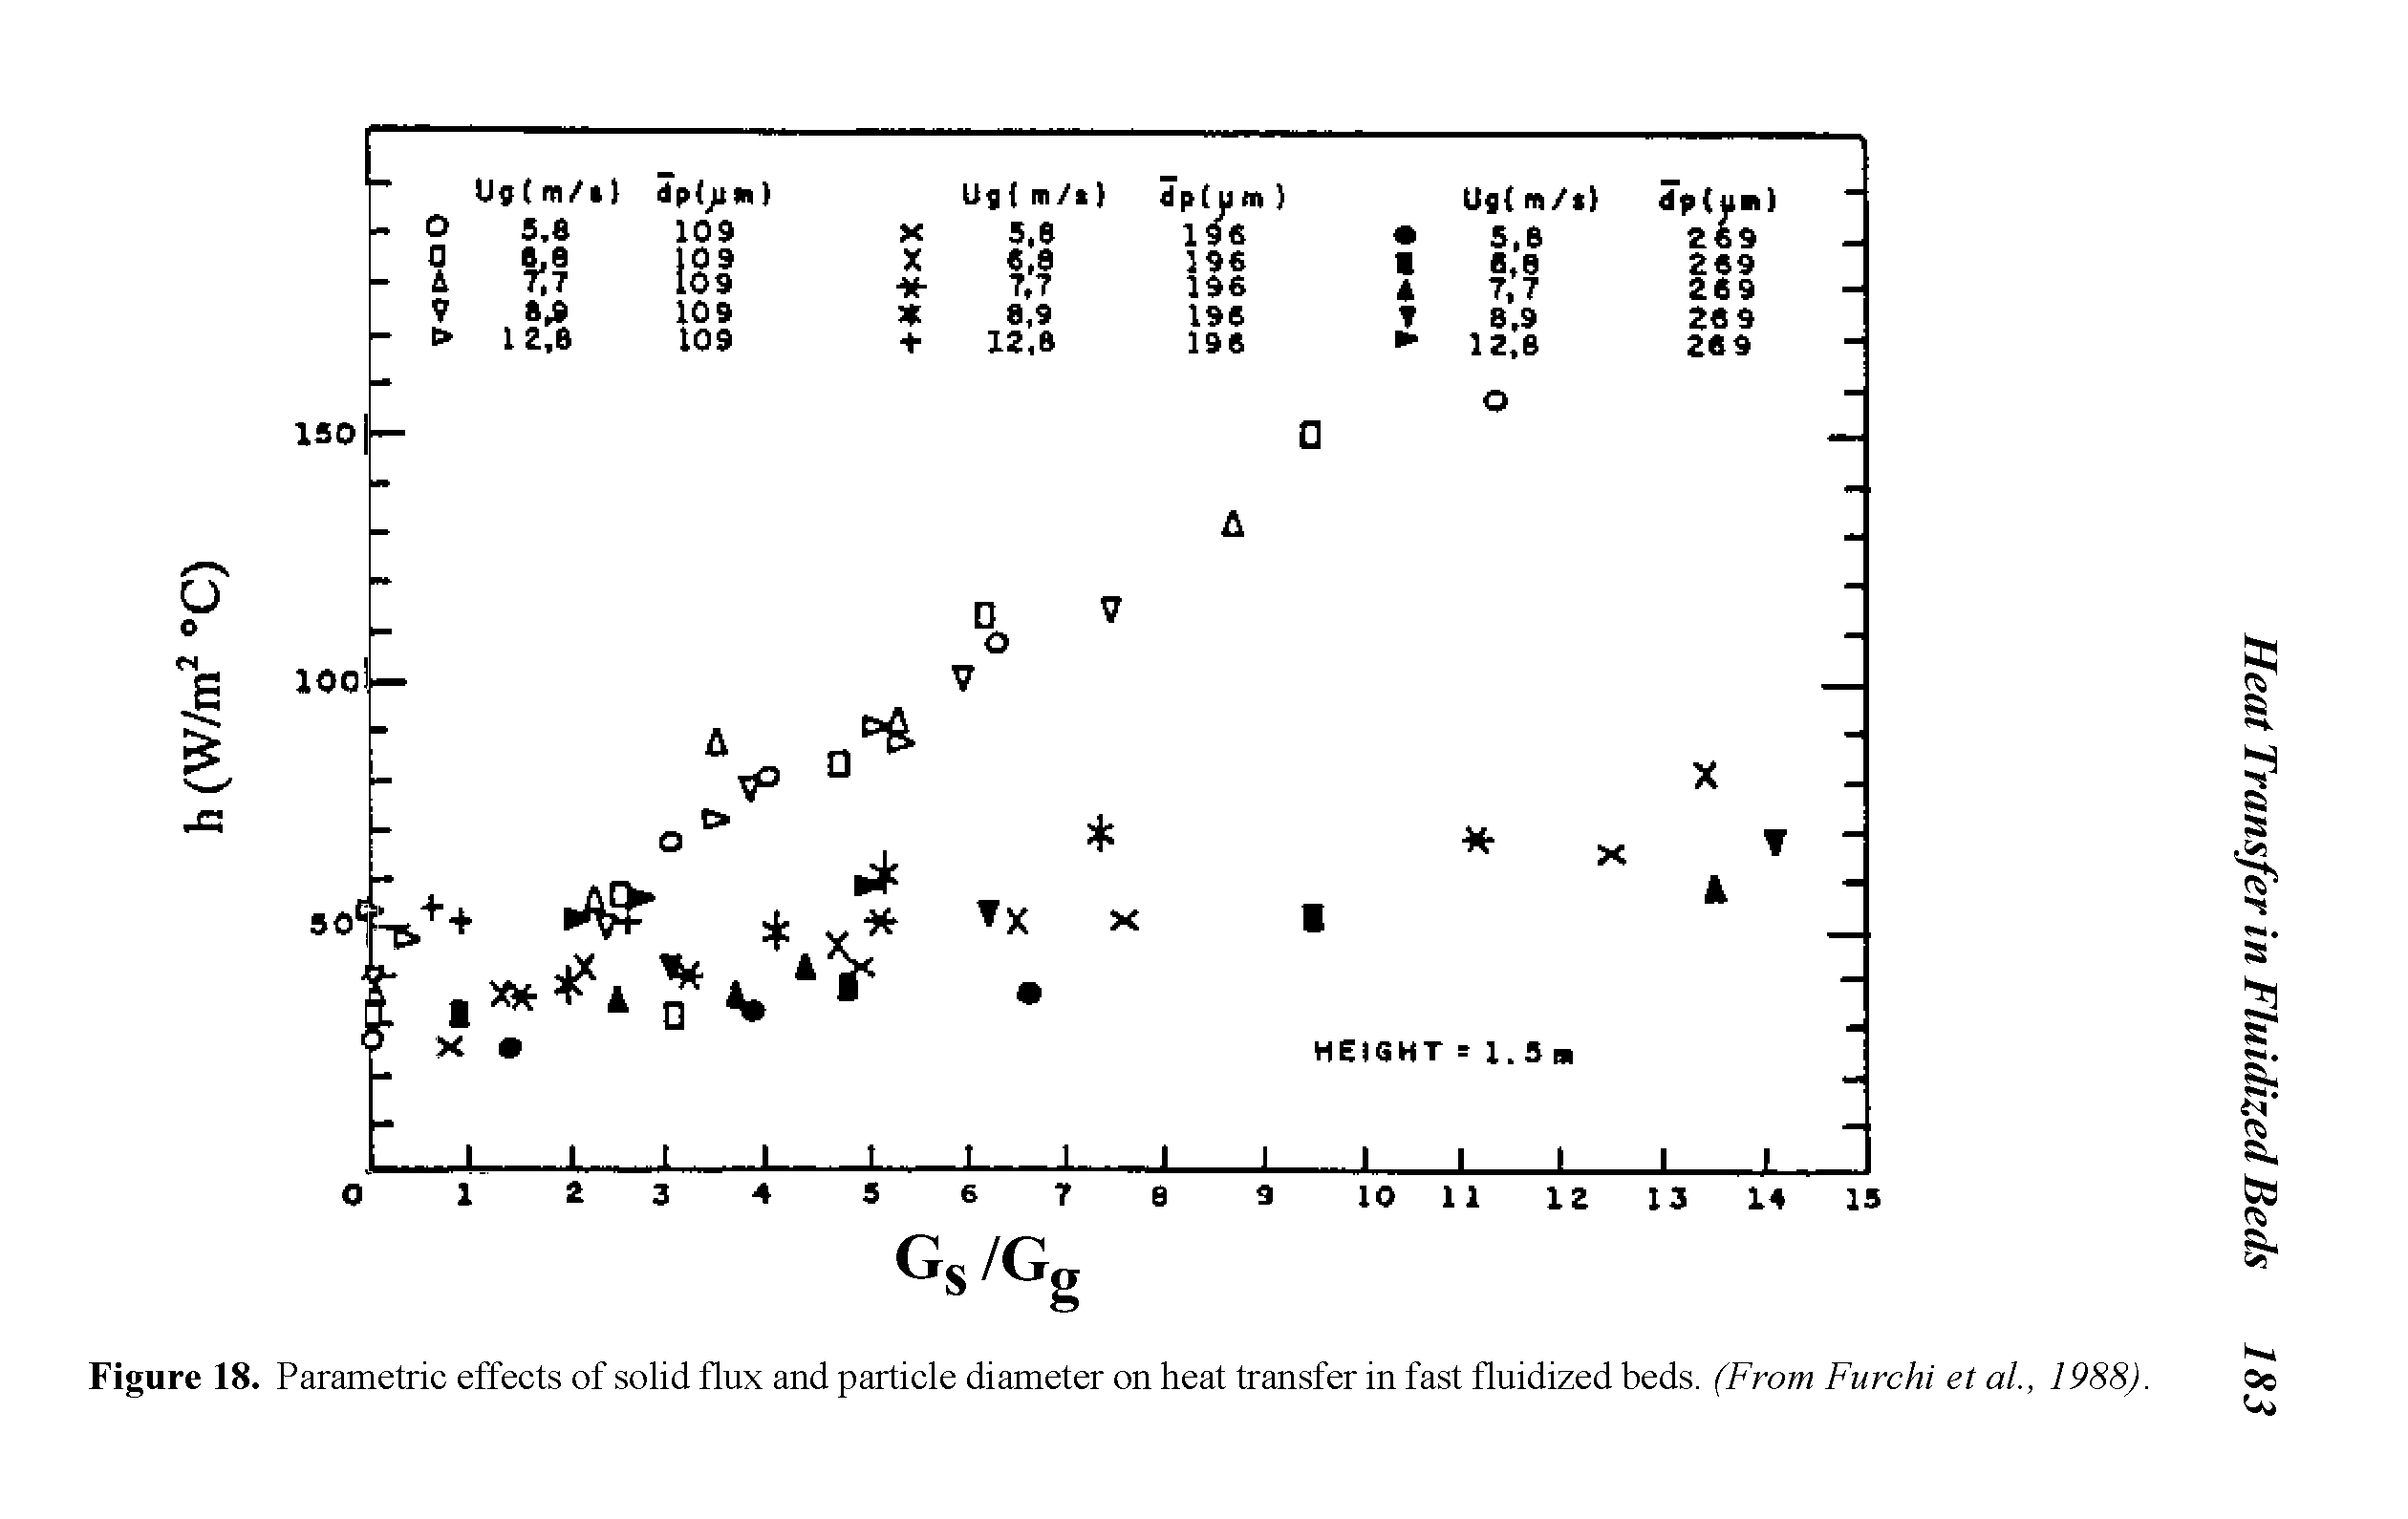 Figure 18. Parametric effects of solid flux and particle diameter on heat transfer in fast fluidized beds. (From Furchi et al, 1988).